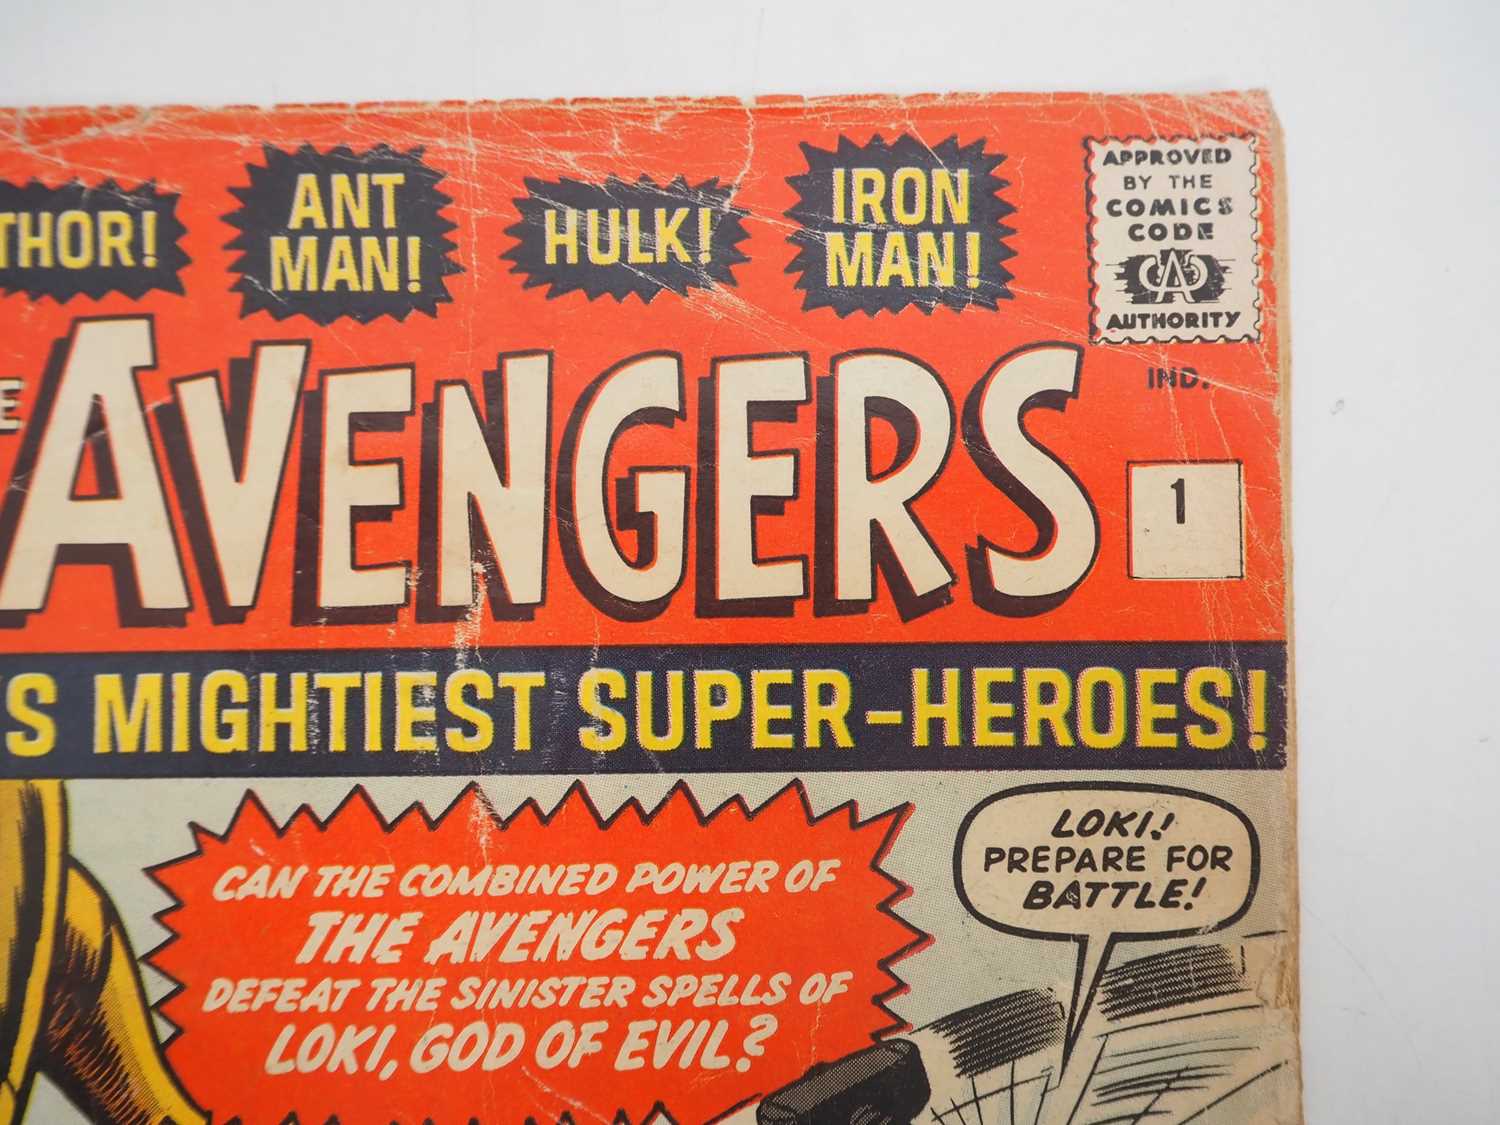 AVENGERS #1 - (1963 - MARVEL - UK Price Variant) - KEY Comic Book - First appearance of the Avengers - Image 3 of 29